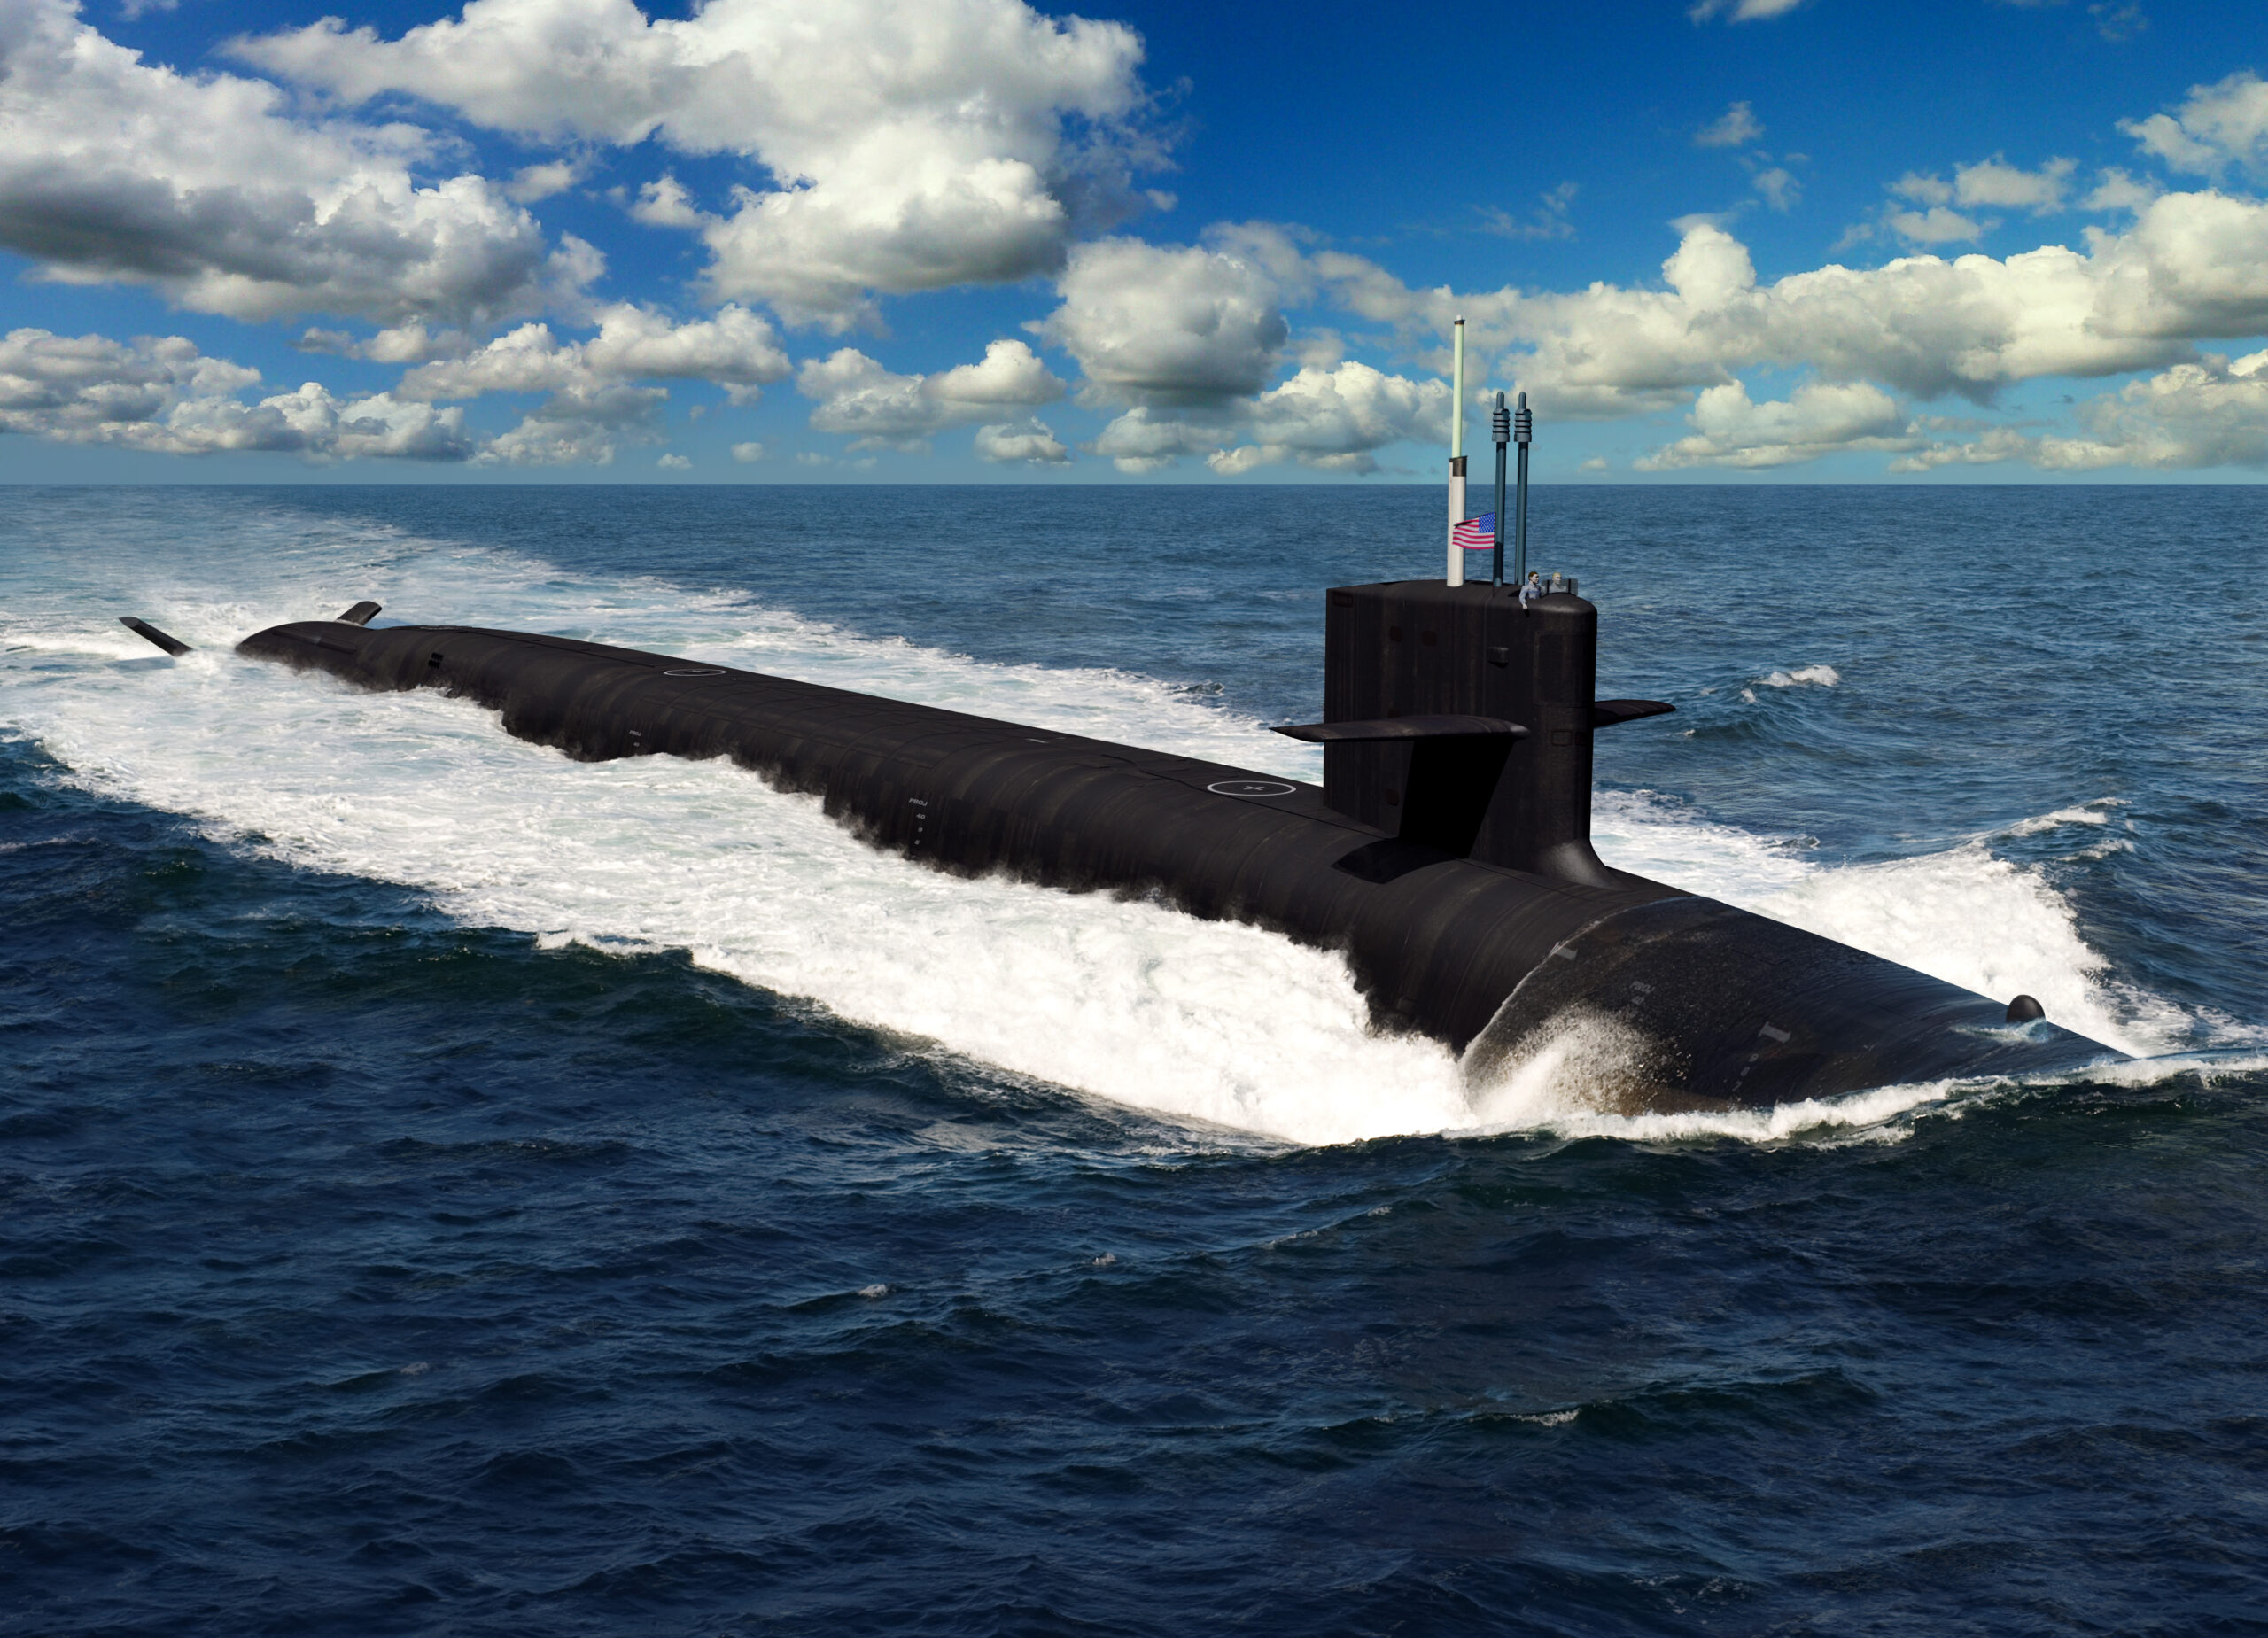 An artist rendering of a Columbia-class nuclear submarine breaching the surface. The top half of the submarine can be seen above the water surrounding it.